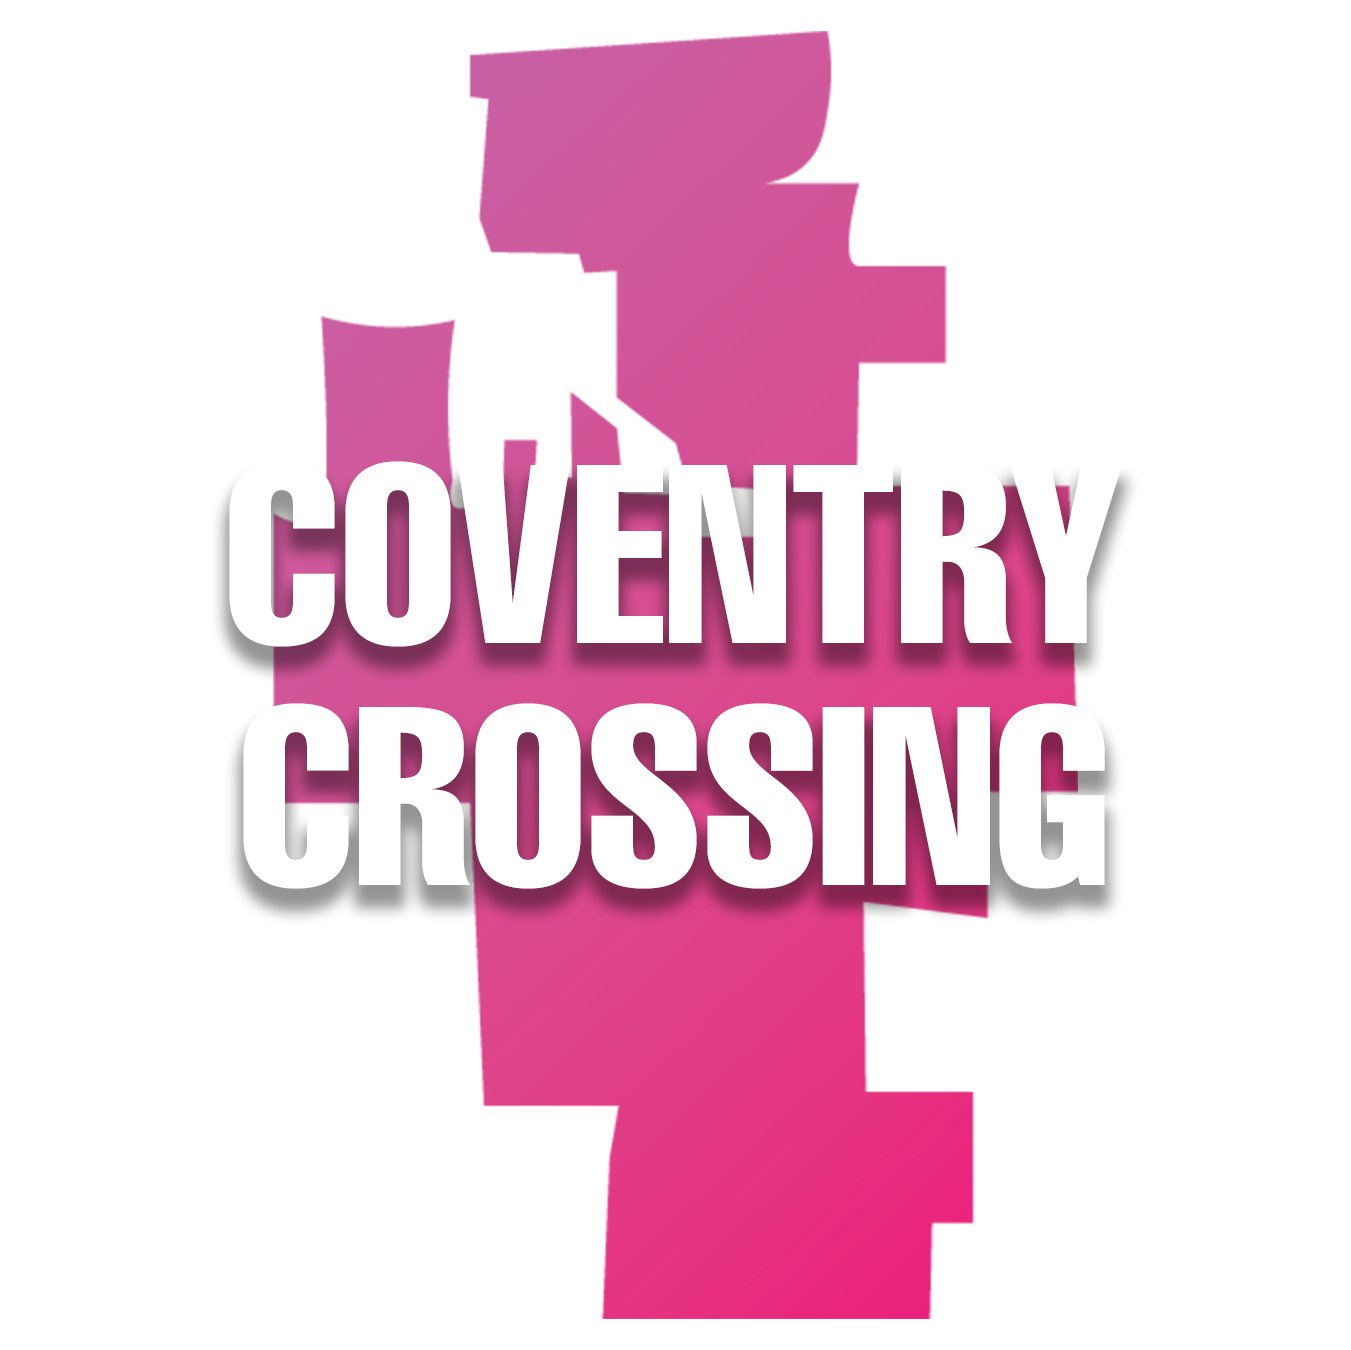 Coventry Crossing